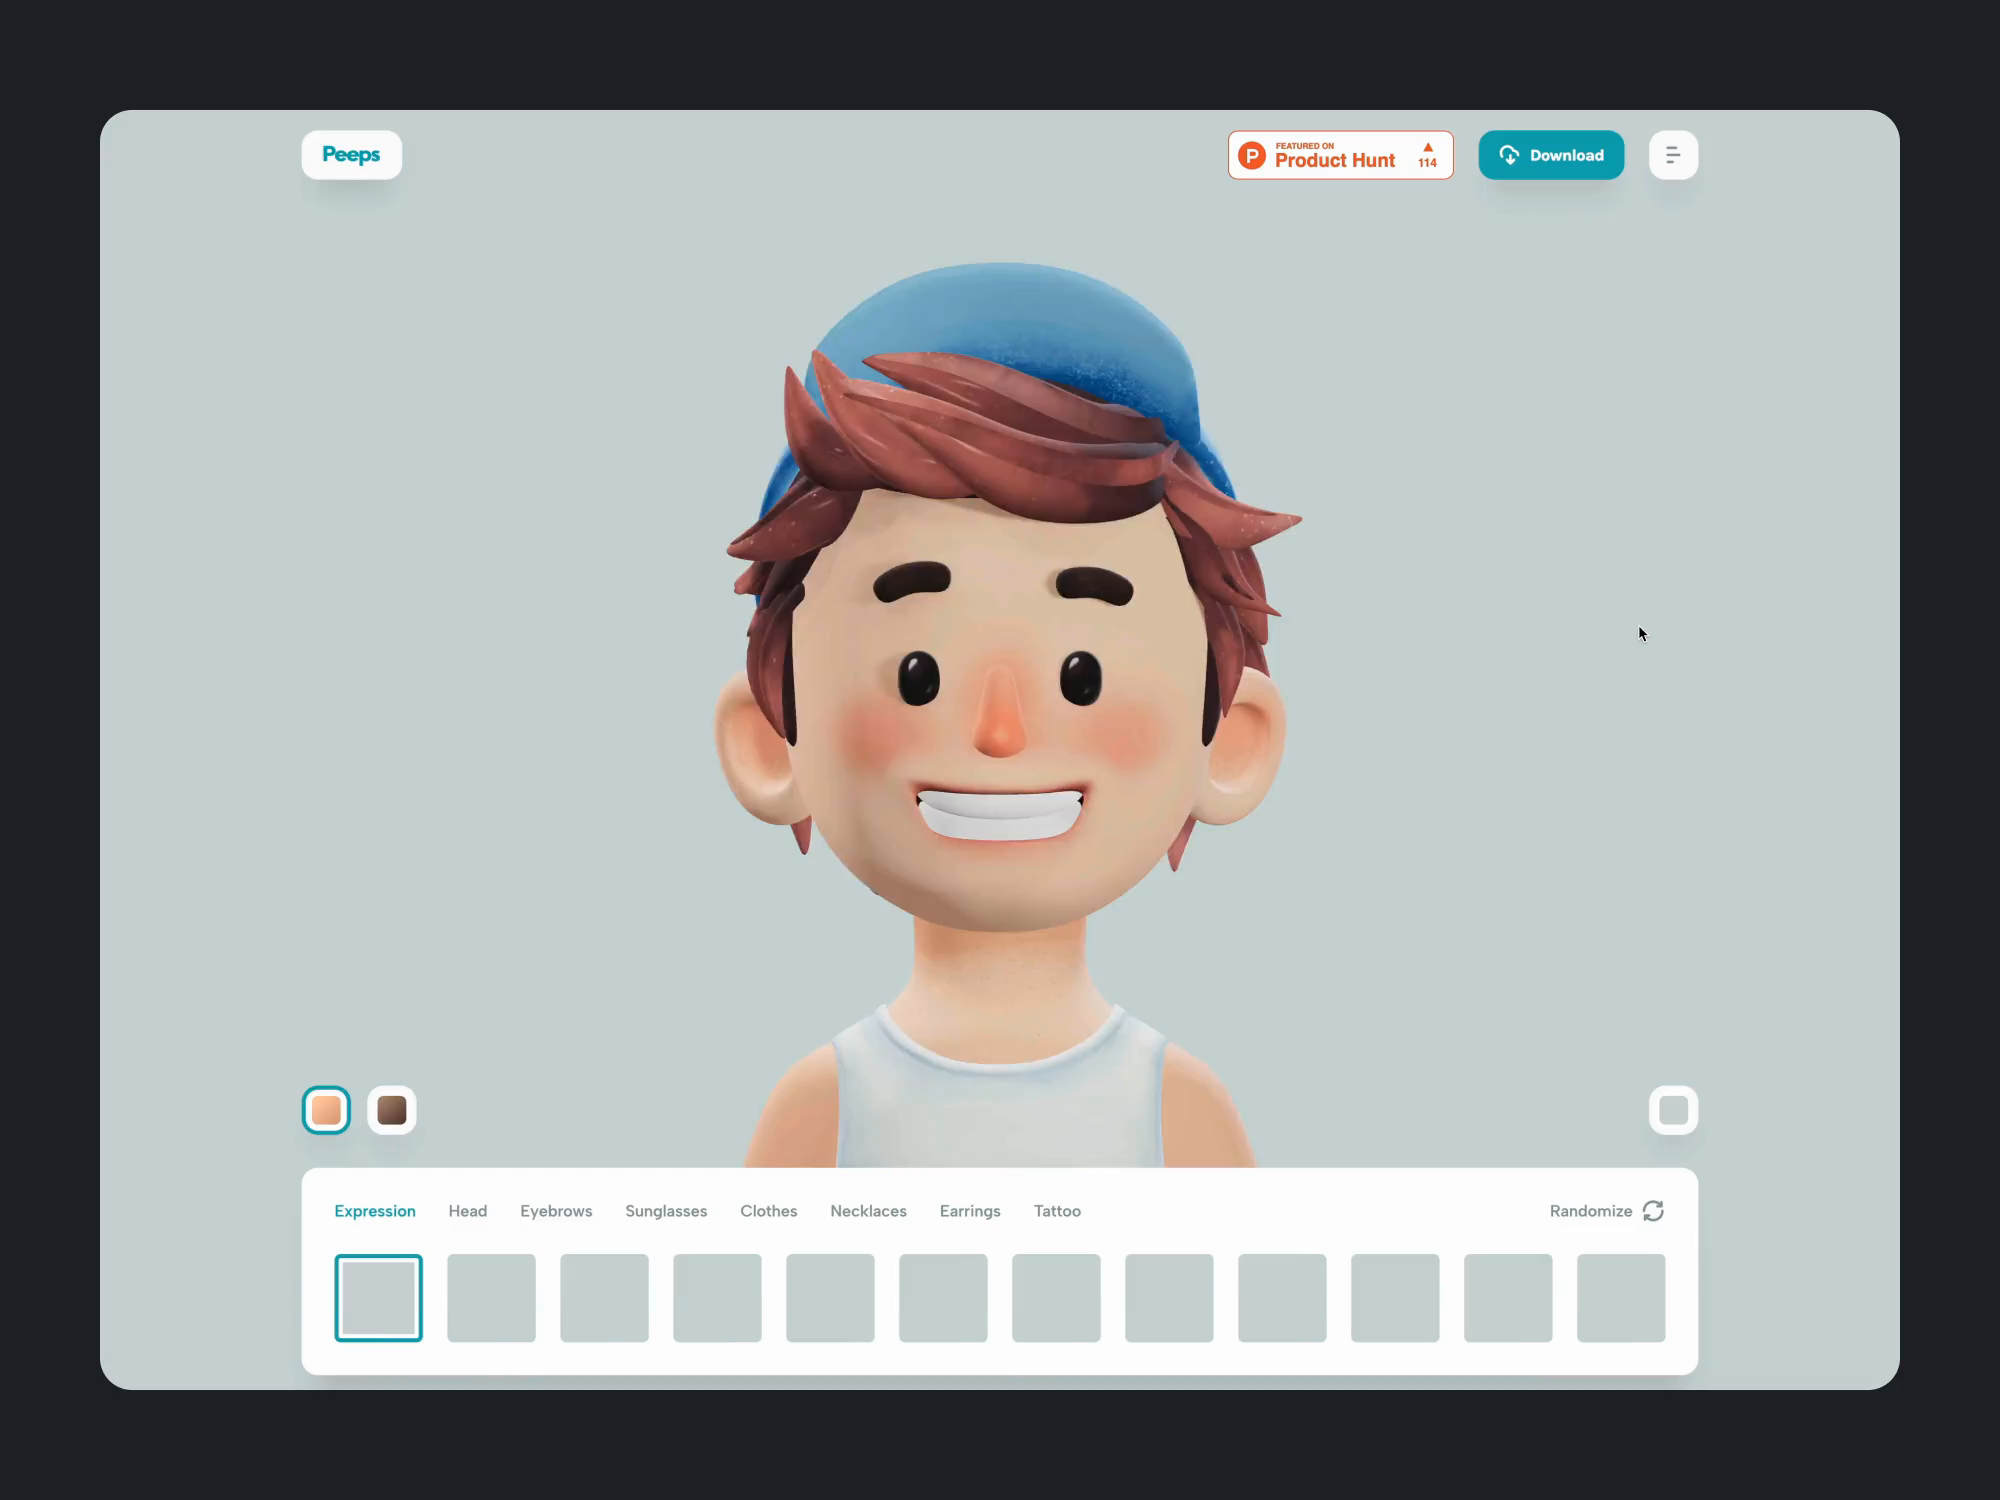 Peeps: 3D Avatar Maker - Product Information, Latest Updates, and Reviews  2023